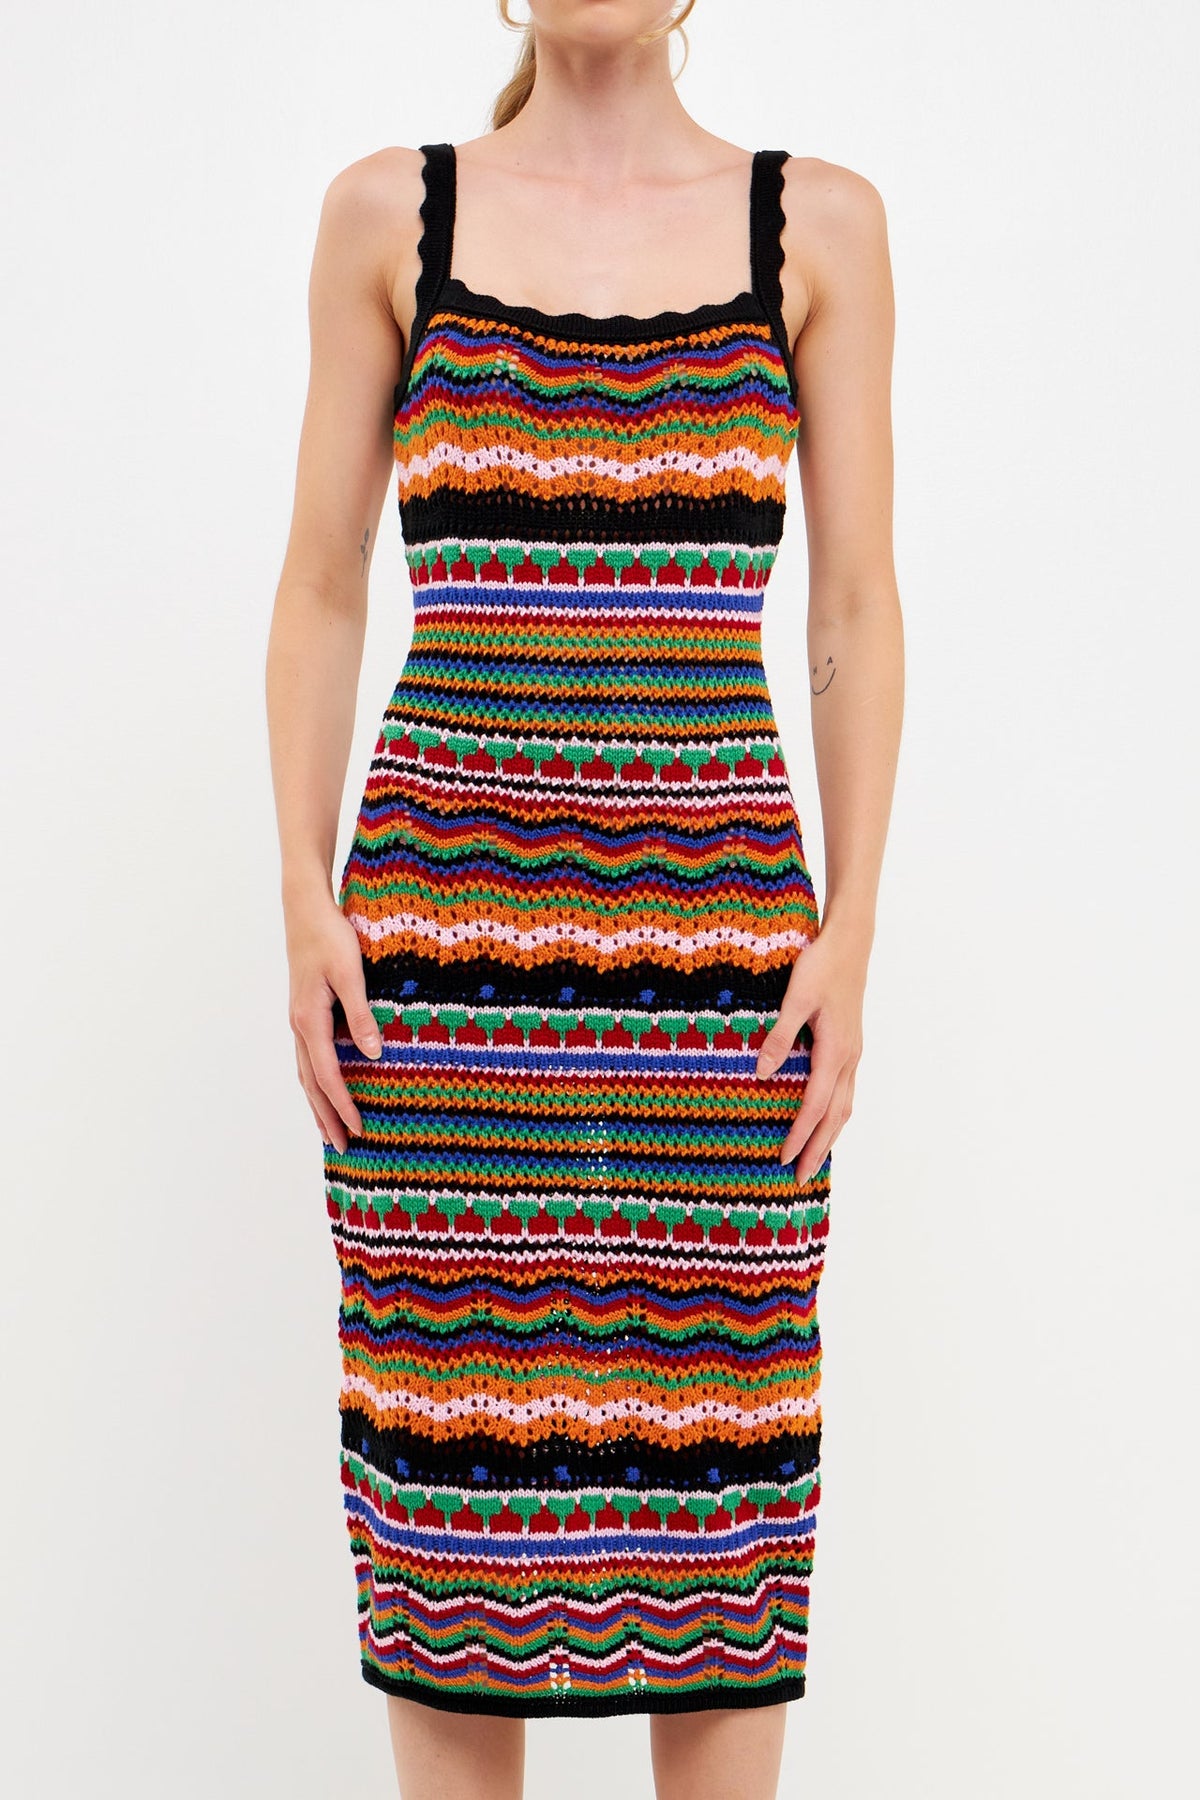 FREE THE ROSES - Crochet Multi Color Maxi Dress - DRESSES available at Objectrare